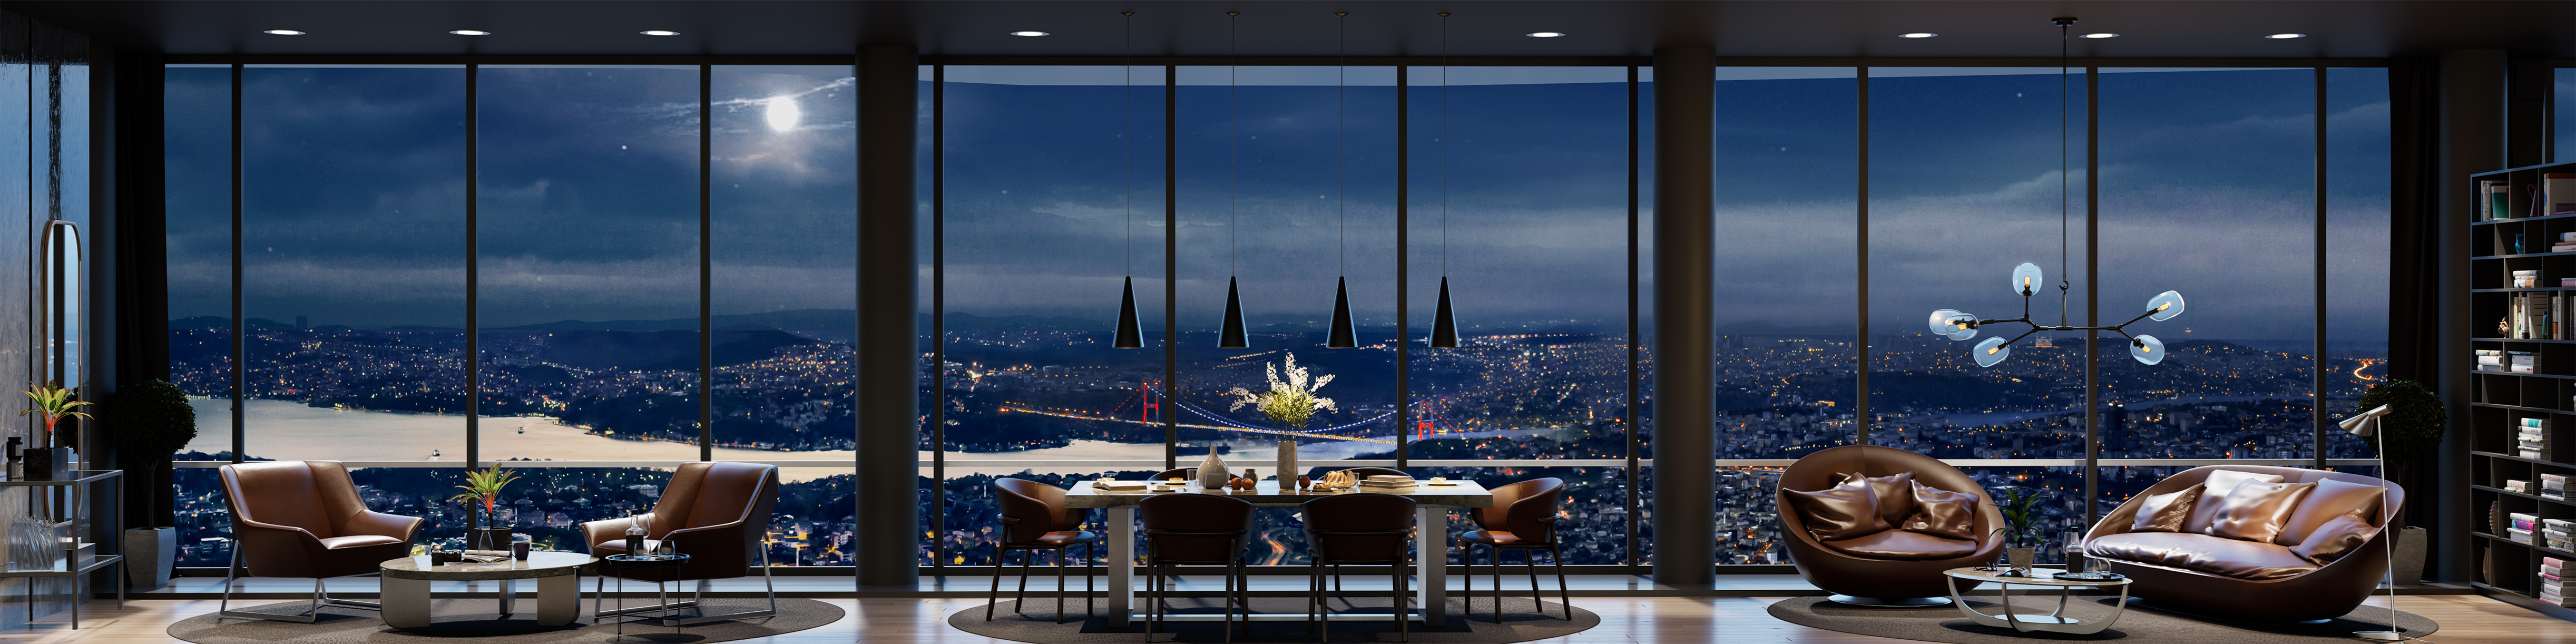 Luxury apartments and offices for sale in Maslak, Istanbul with Bosphorus views